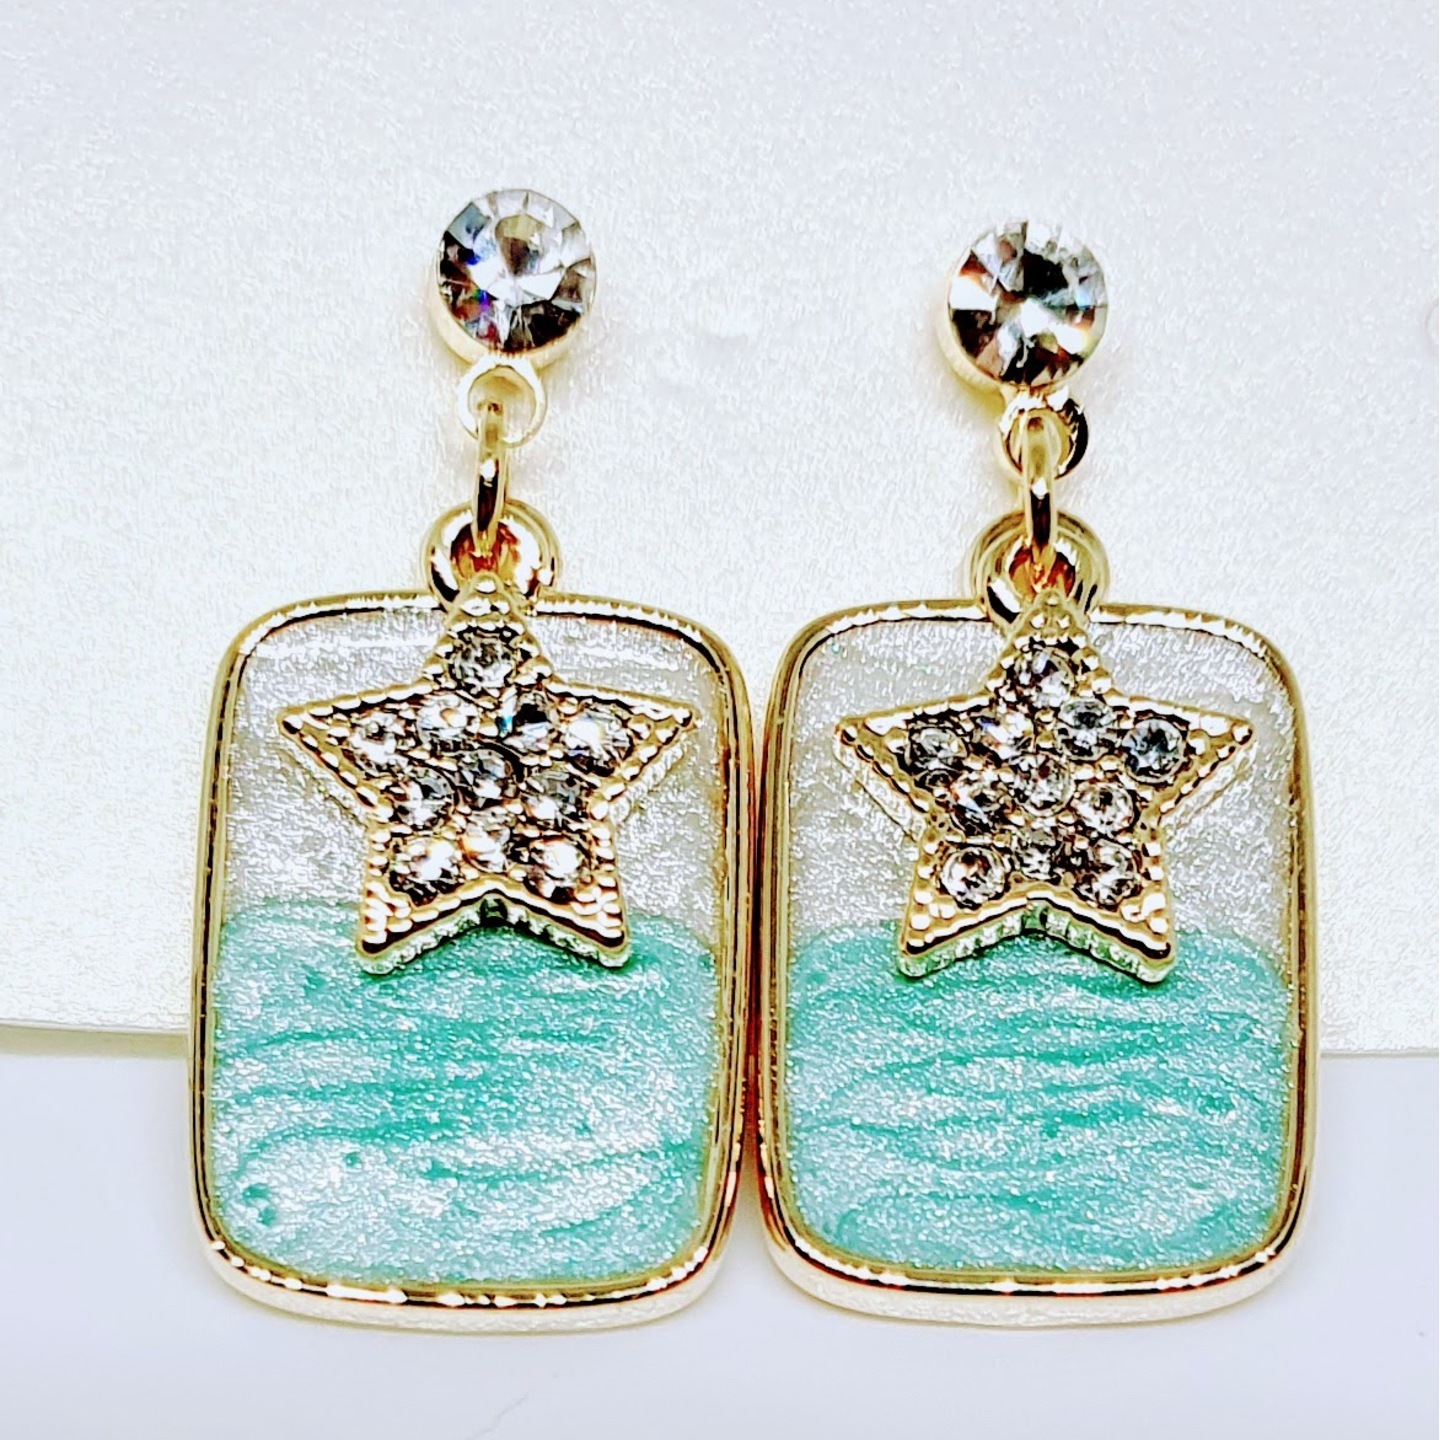 Silver Earrings with Star design - Made in Korea